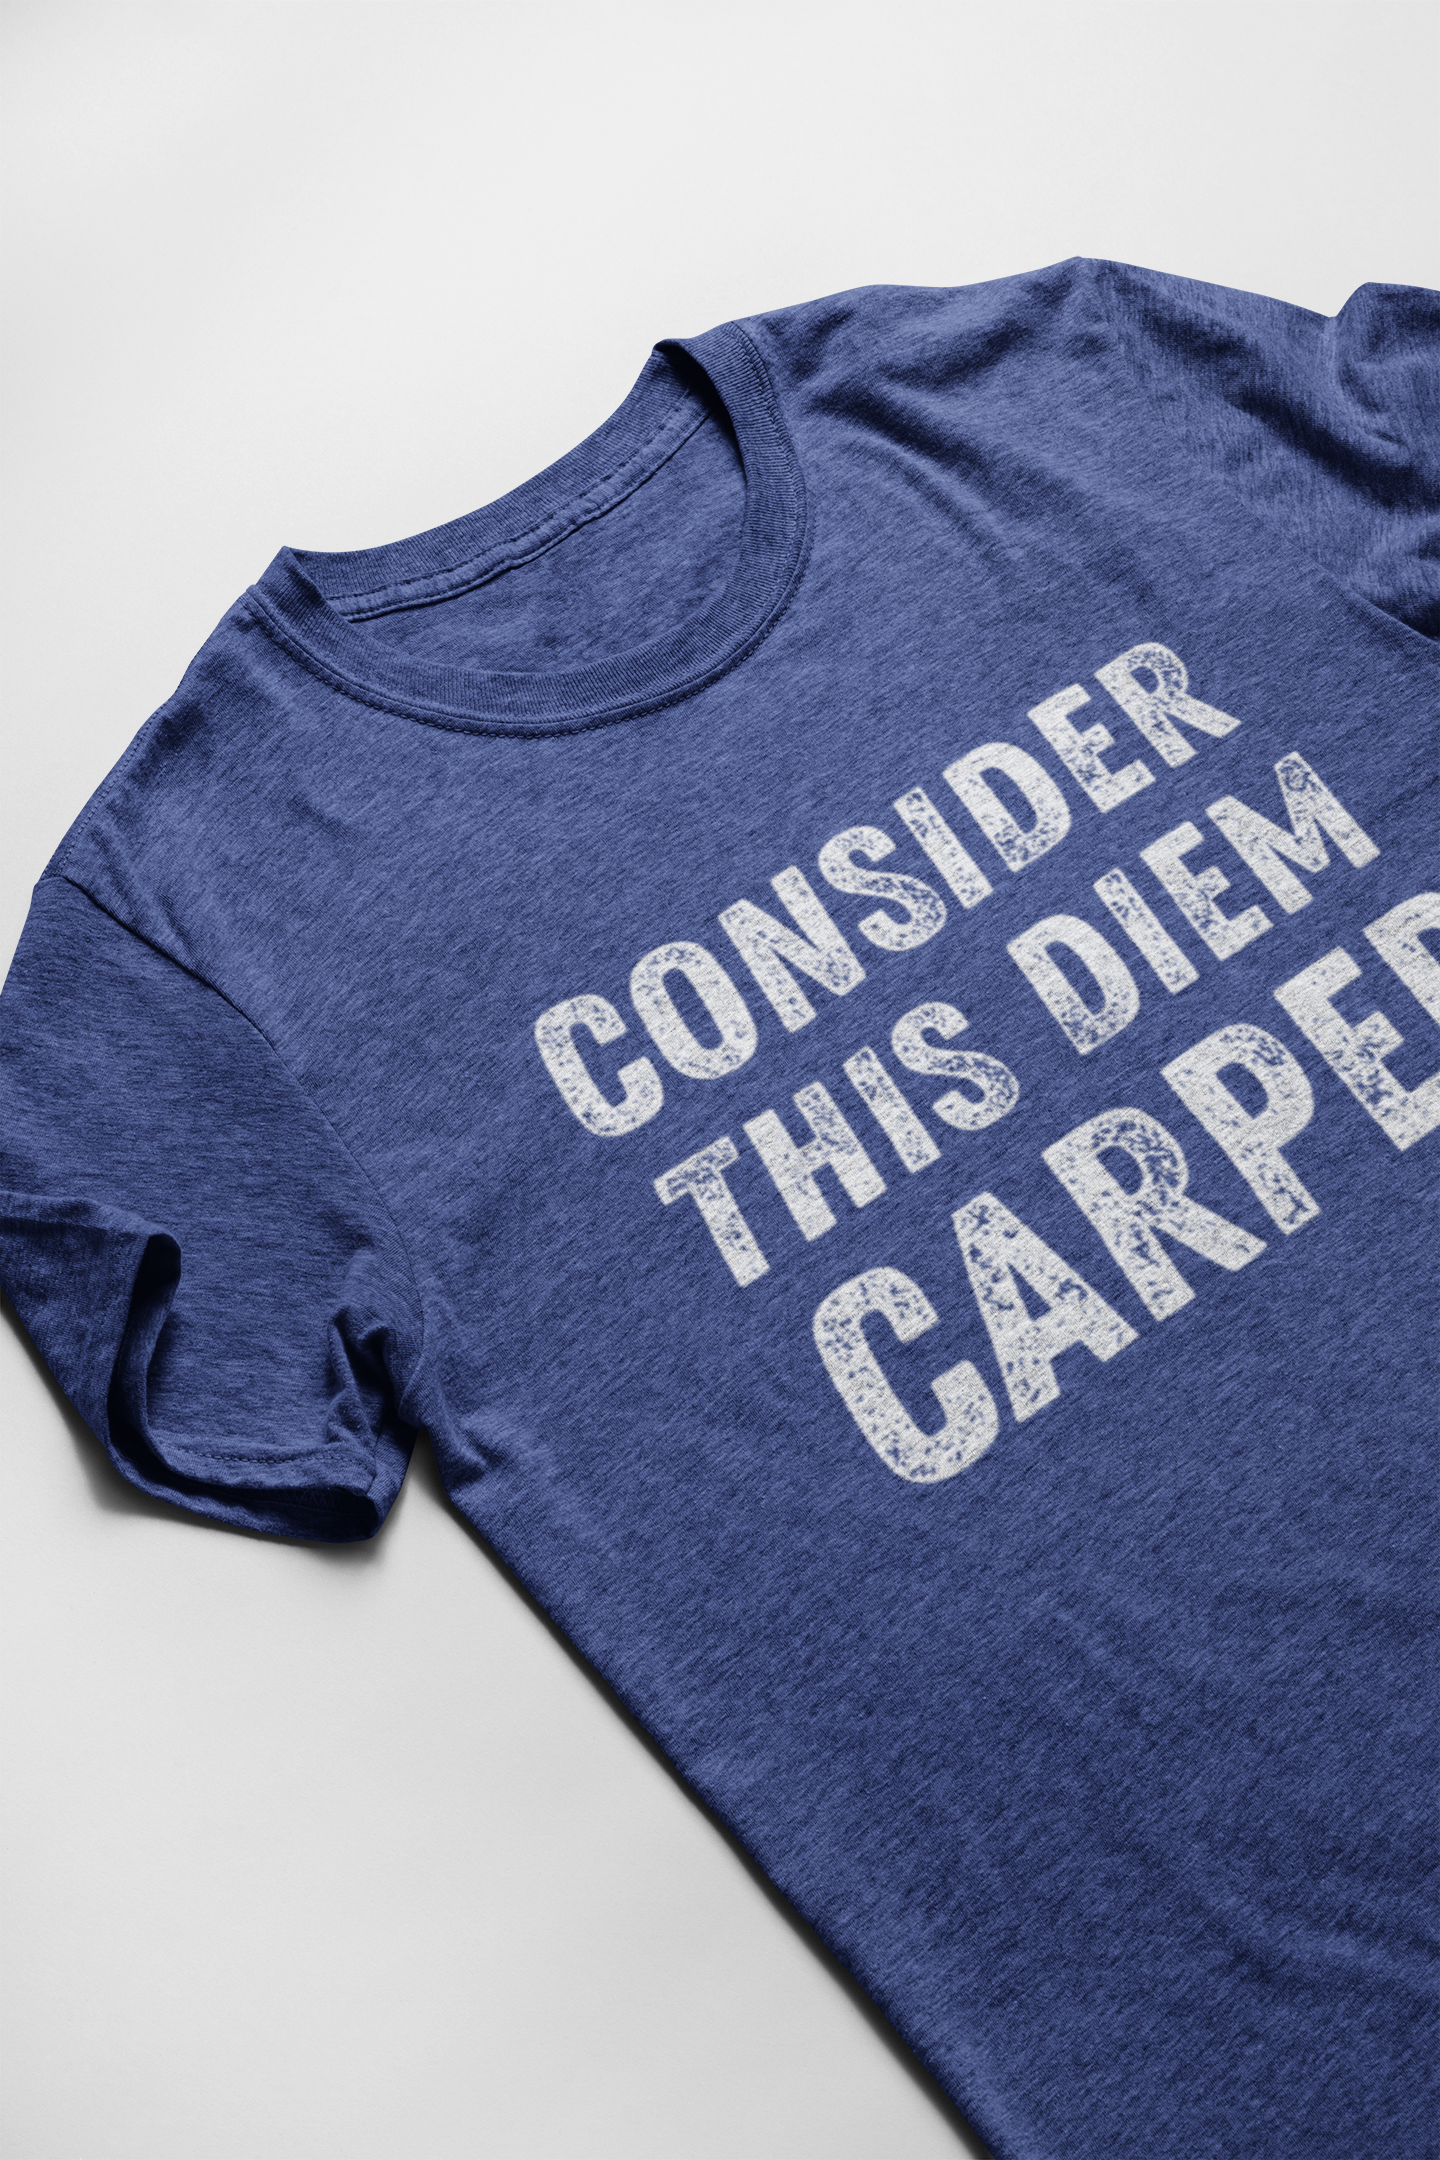 funny t shirt that says consider this diem carped